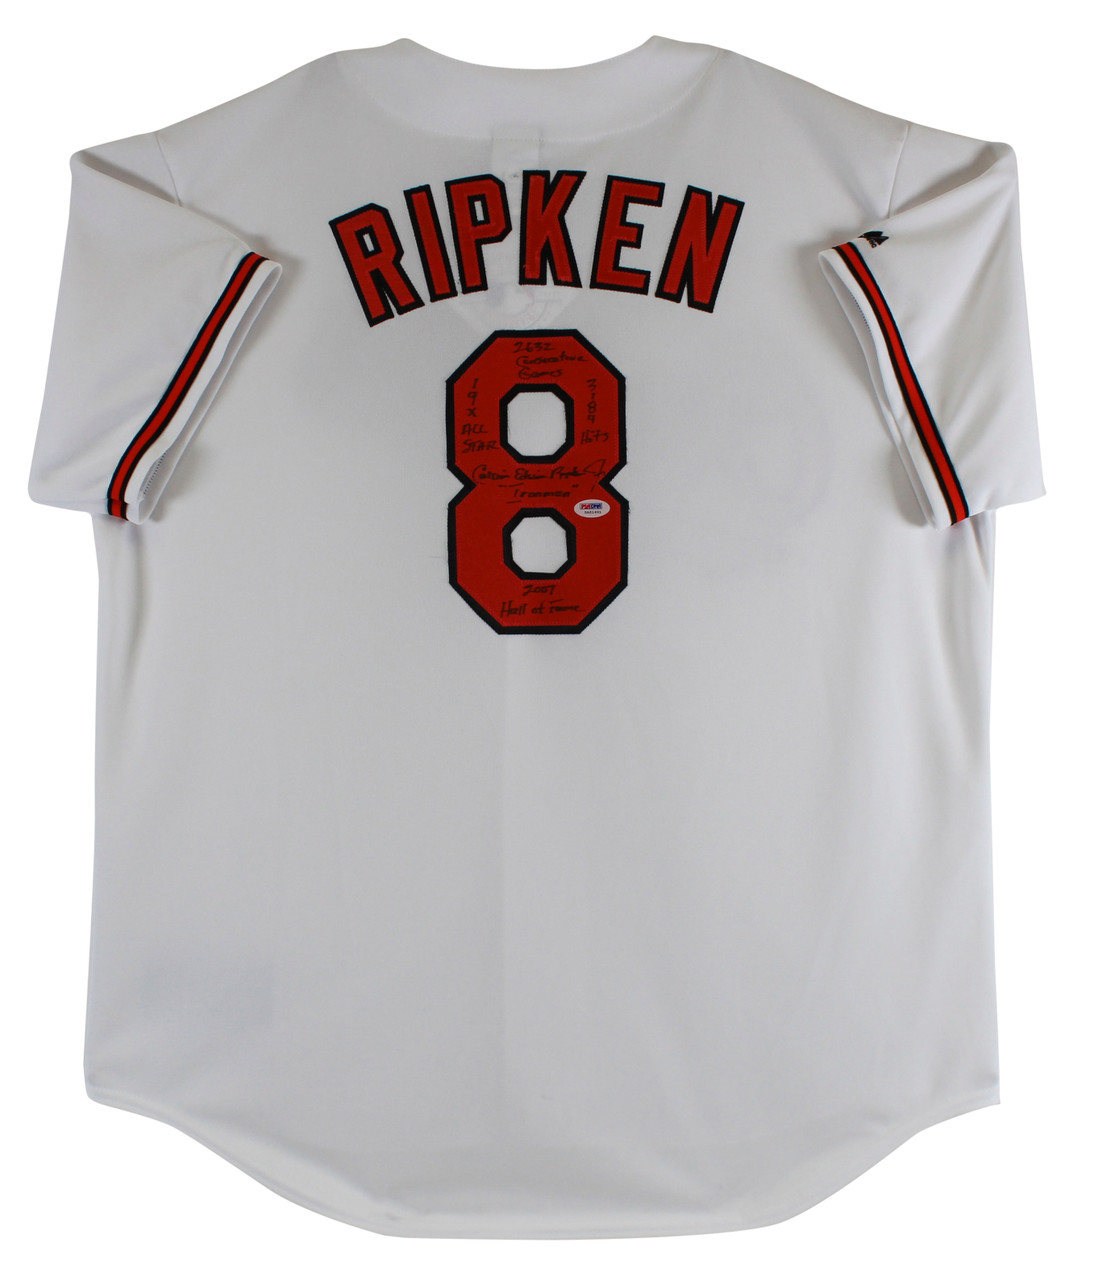 Press Pass Collectibles Orioles Cal Ripken Jr. Full Name w/ Stats Authentic Signed White Jersey PSA/DNA